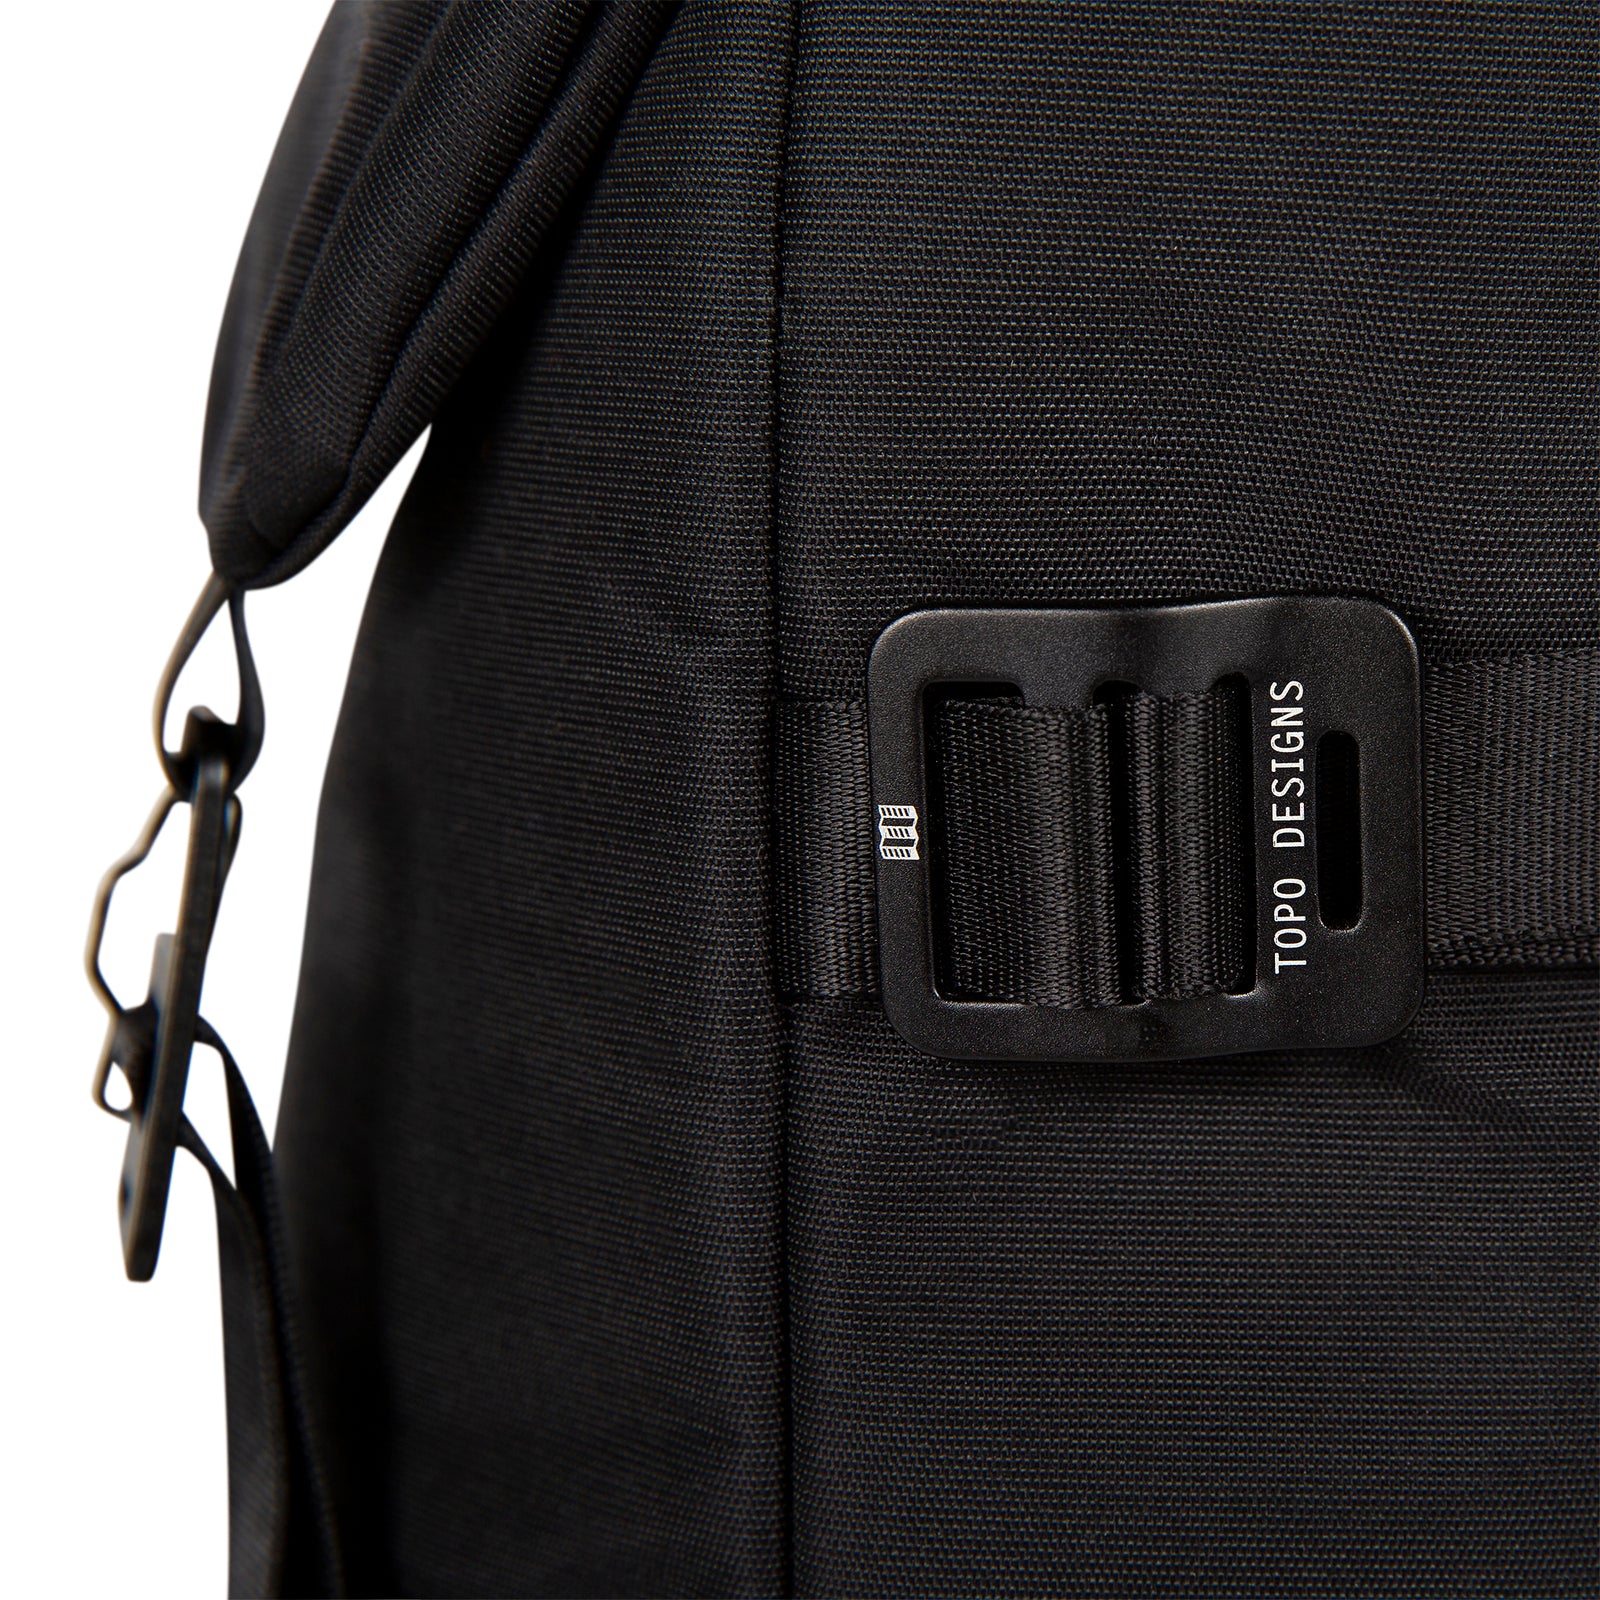 Detail Shot of the Topo Designs Rover Pack Premium showing the hardware on the side of the bag in "Premium Black".